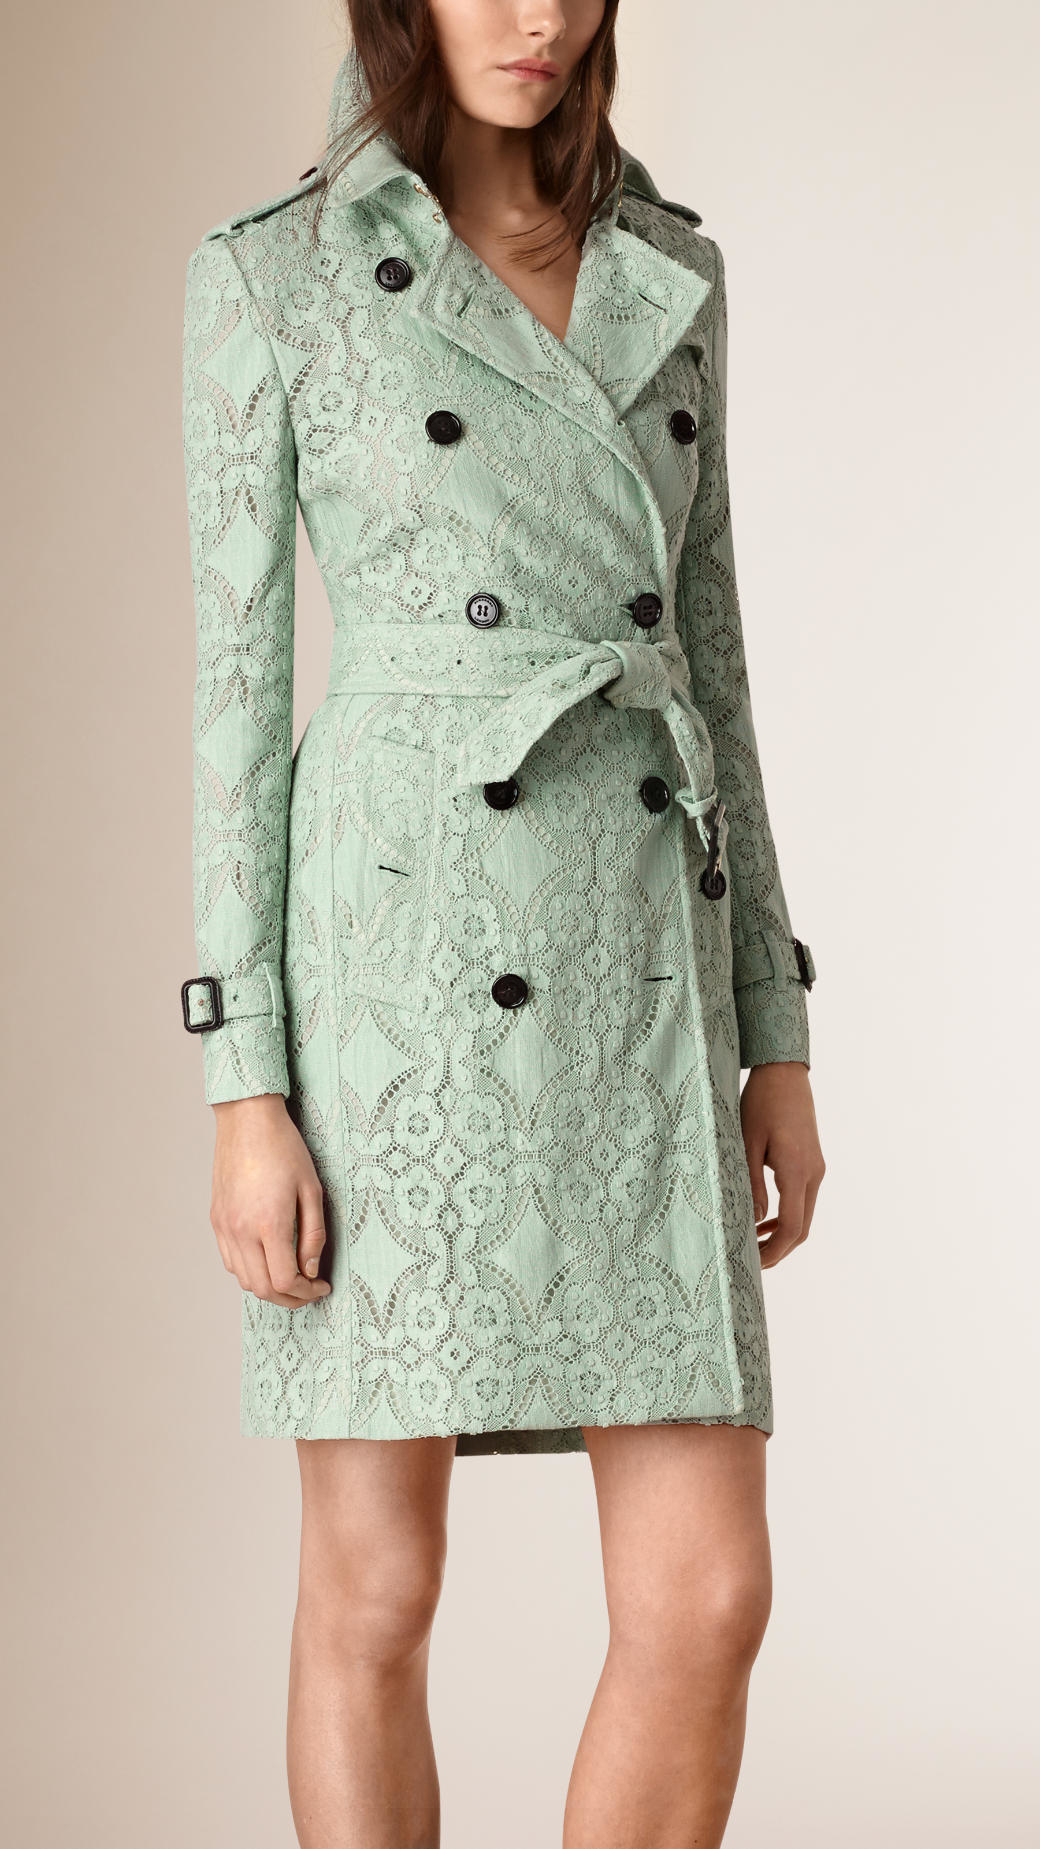 Lyst - Burberry Gabardine Lace Trench Coat in Green